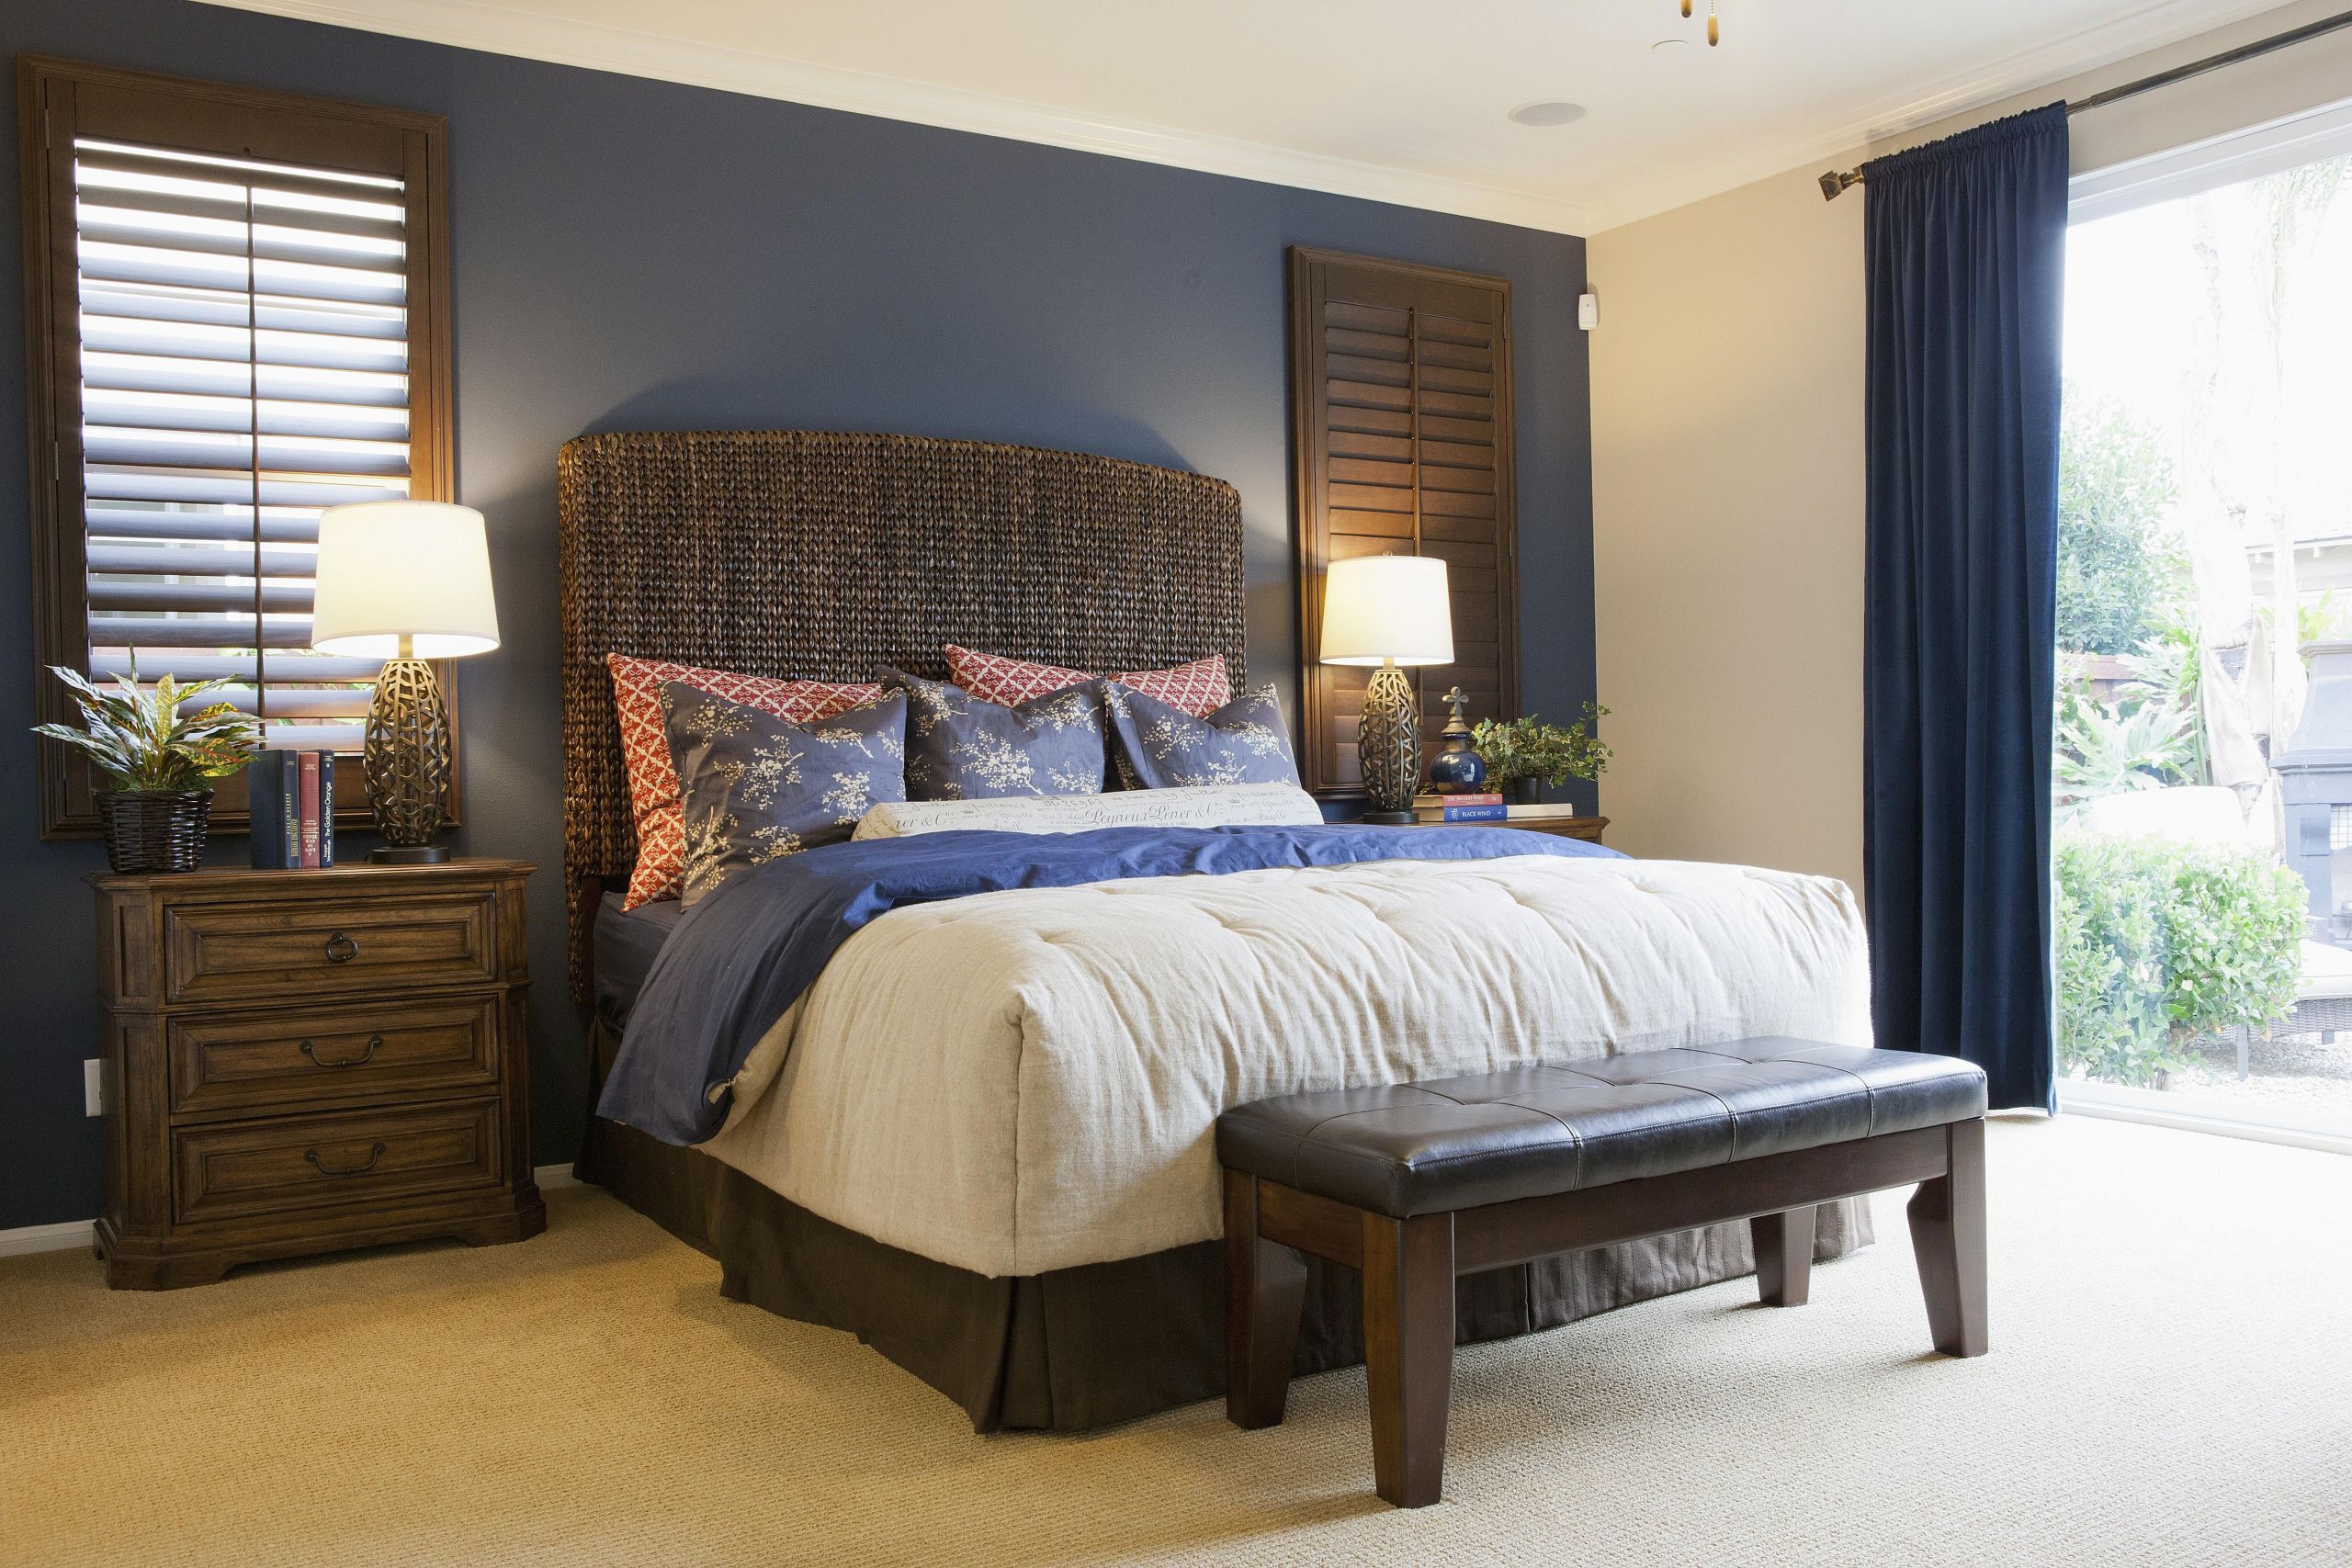 Accent Walls Ideas Bedroom
 How to Choose an Accent Wall and Color in a Bedroom